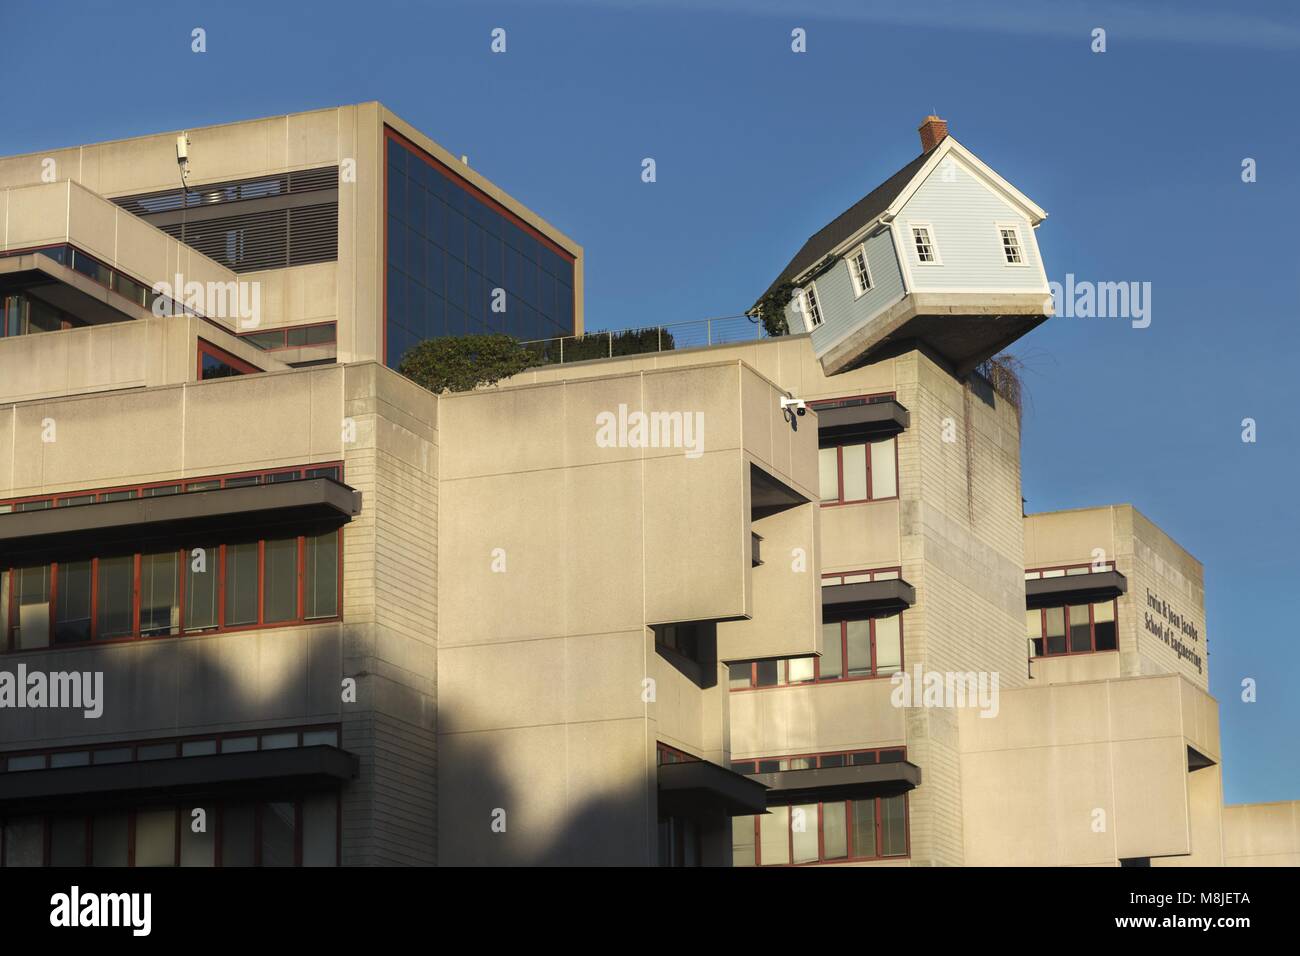 Fallen Star, an artwork by Do Ho Suh, a skewed house on top of Jacobs School of Science and Engineering at University of California San Diego UCSD Stock Photo